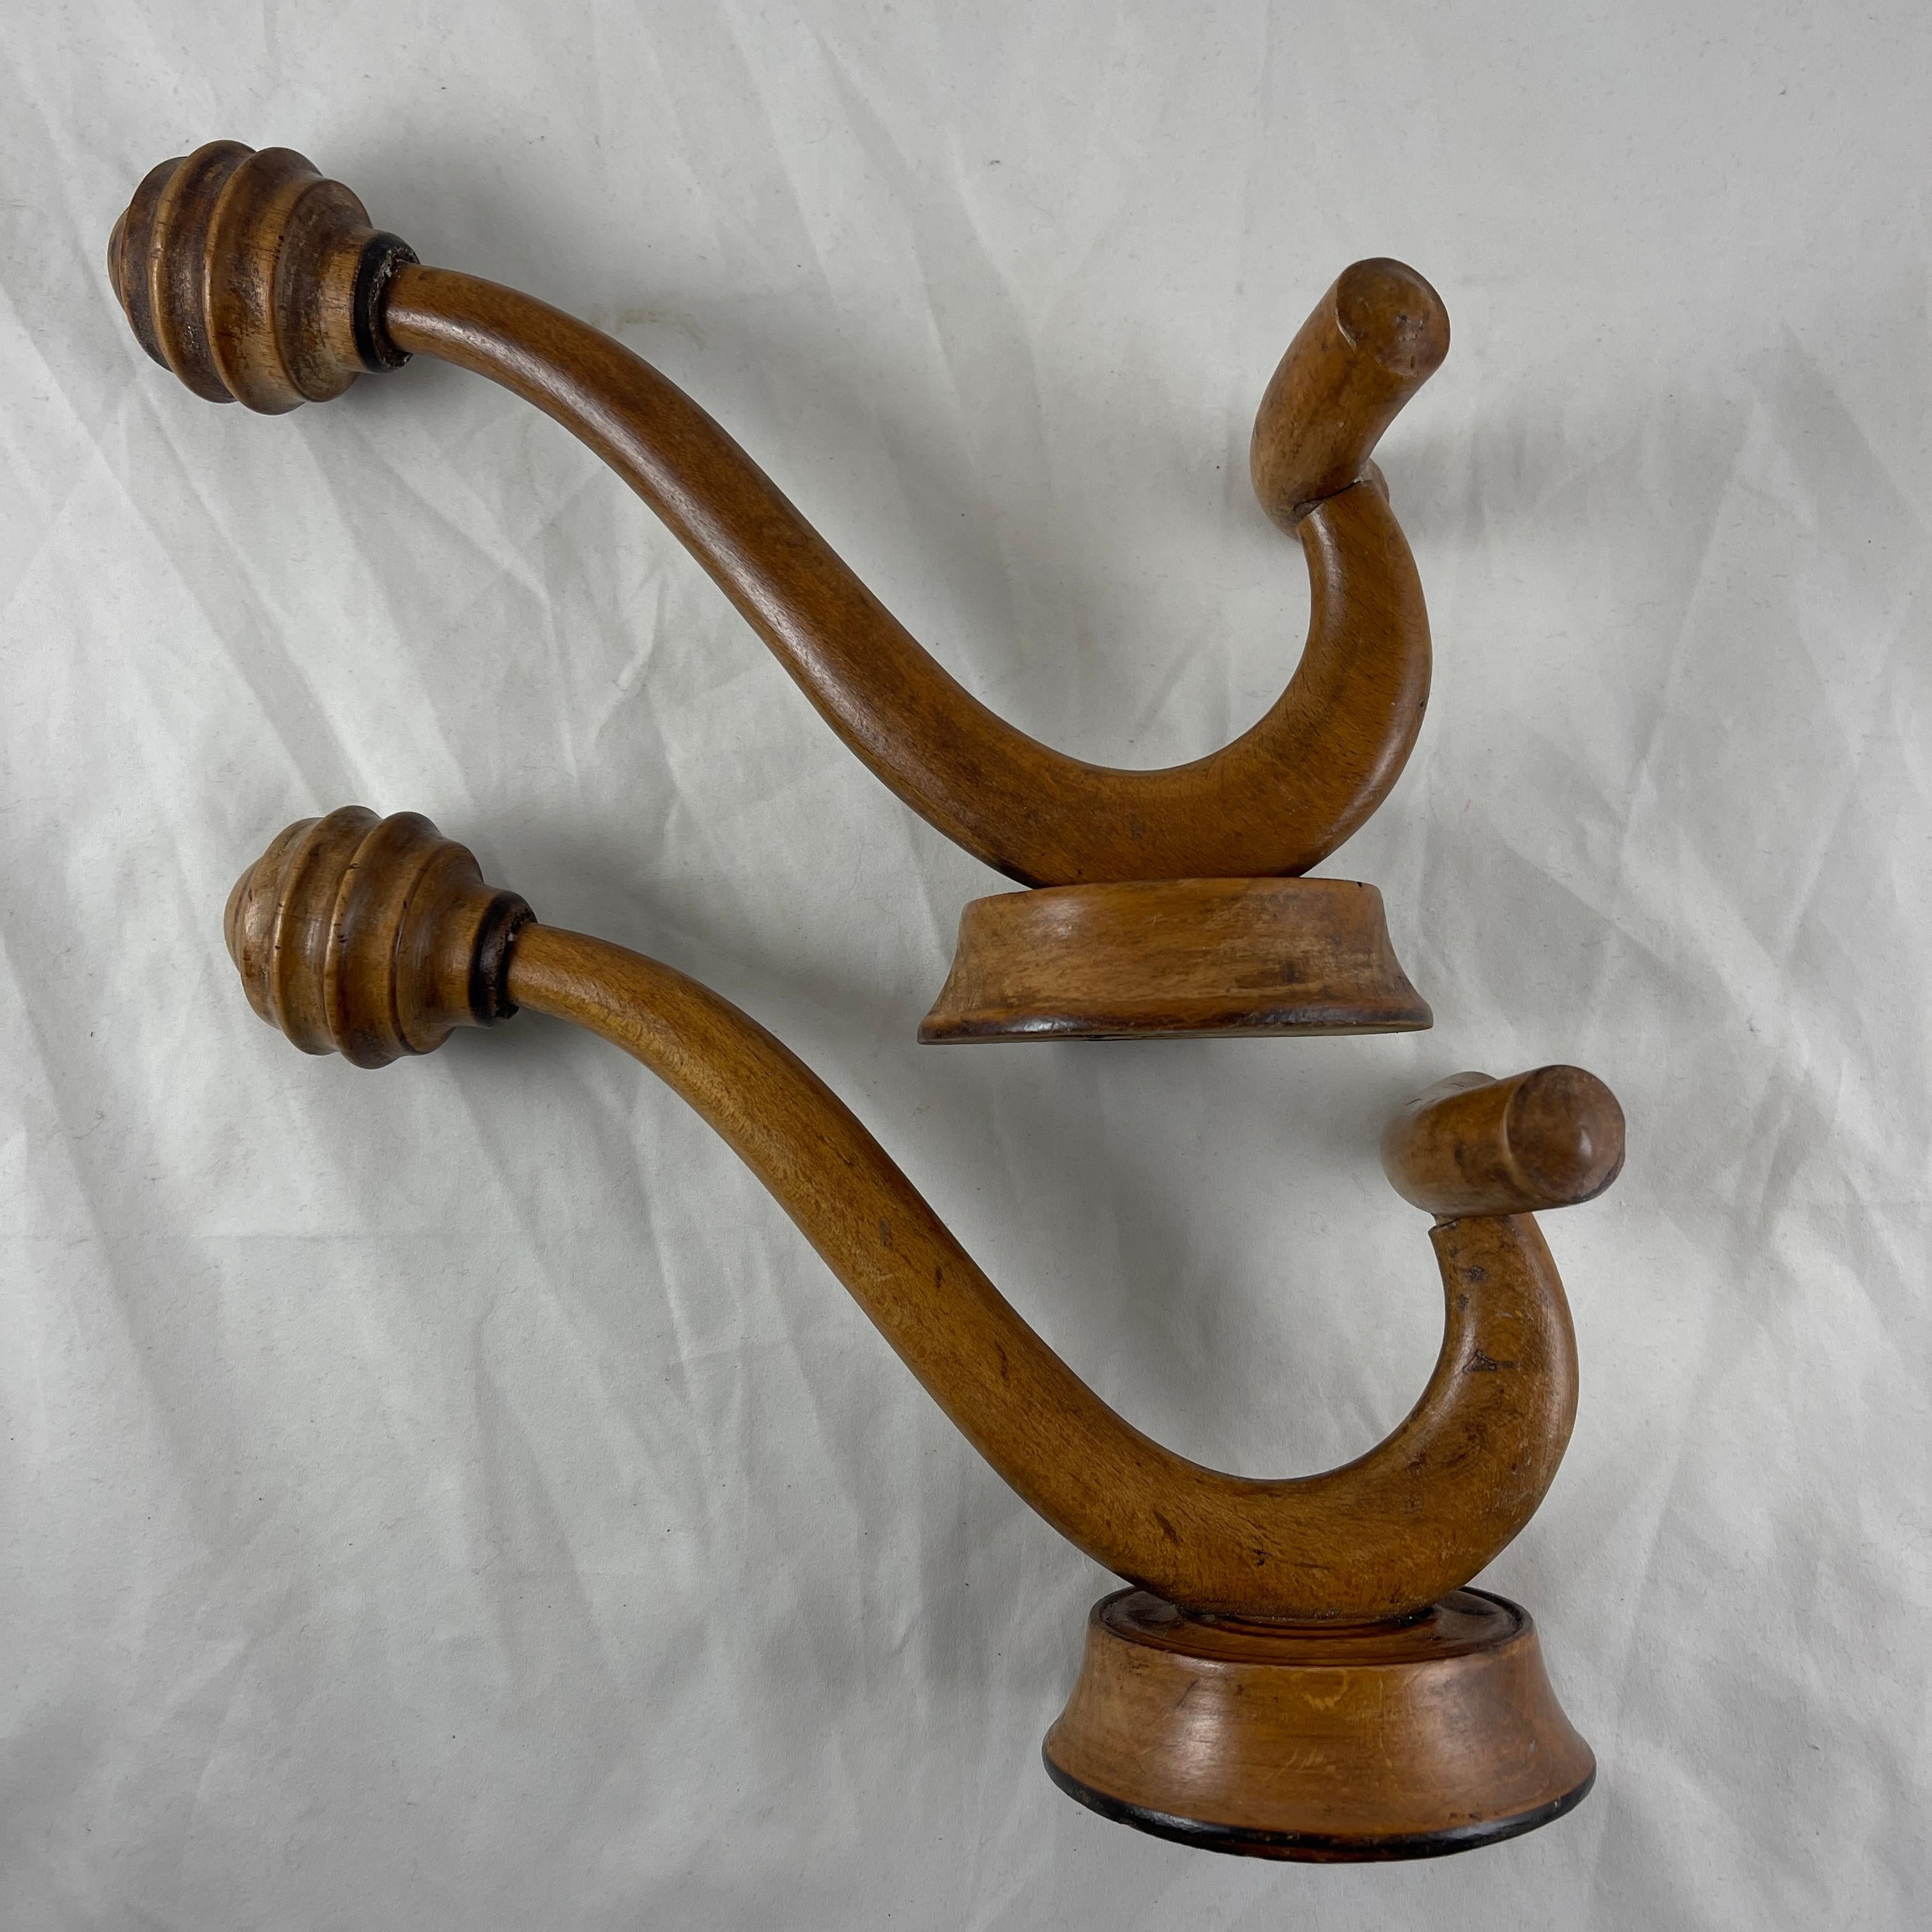 A pair of French Art Nouveau period bentwood hat and coat pegs, circa 1910 – 1920.

The wall mounted Beechwood hooks have turned upper pegs for holding a hat, with a u-shaped peg for a coat, mounted on a beveled round wooden disc.

Most often